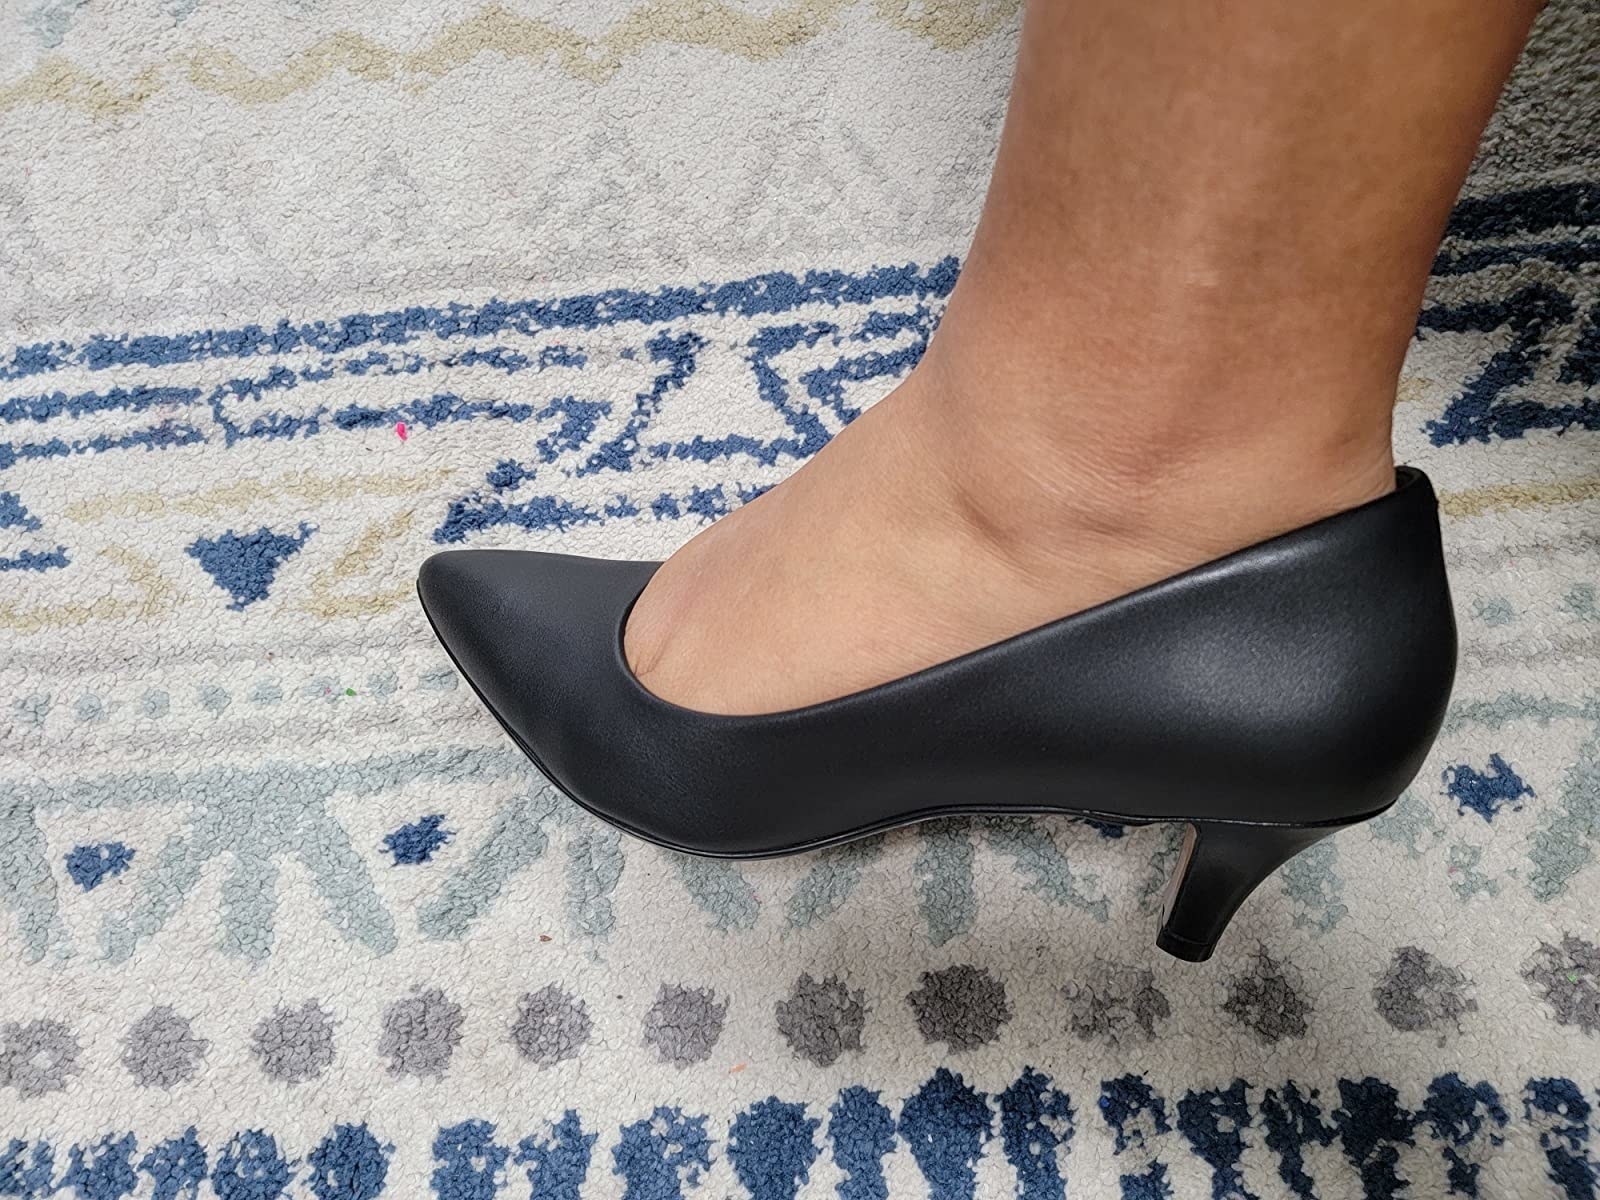 reviewer wearing pointed-tow low-heeled black pump